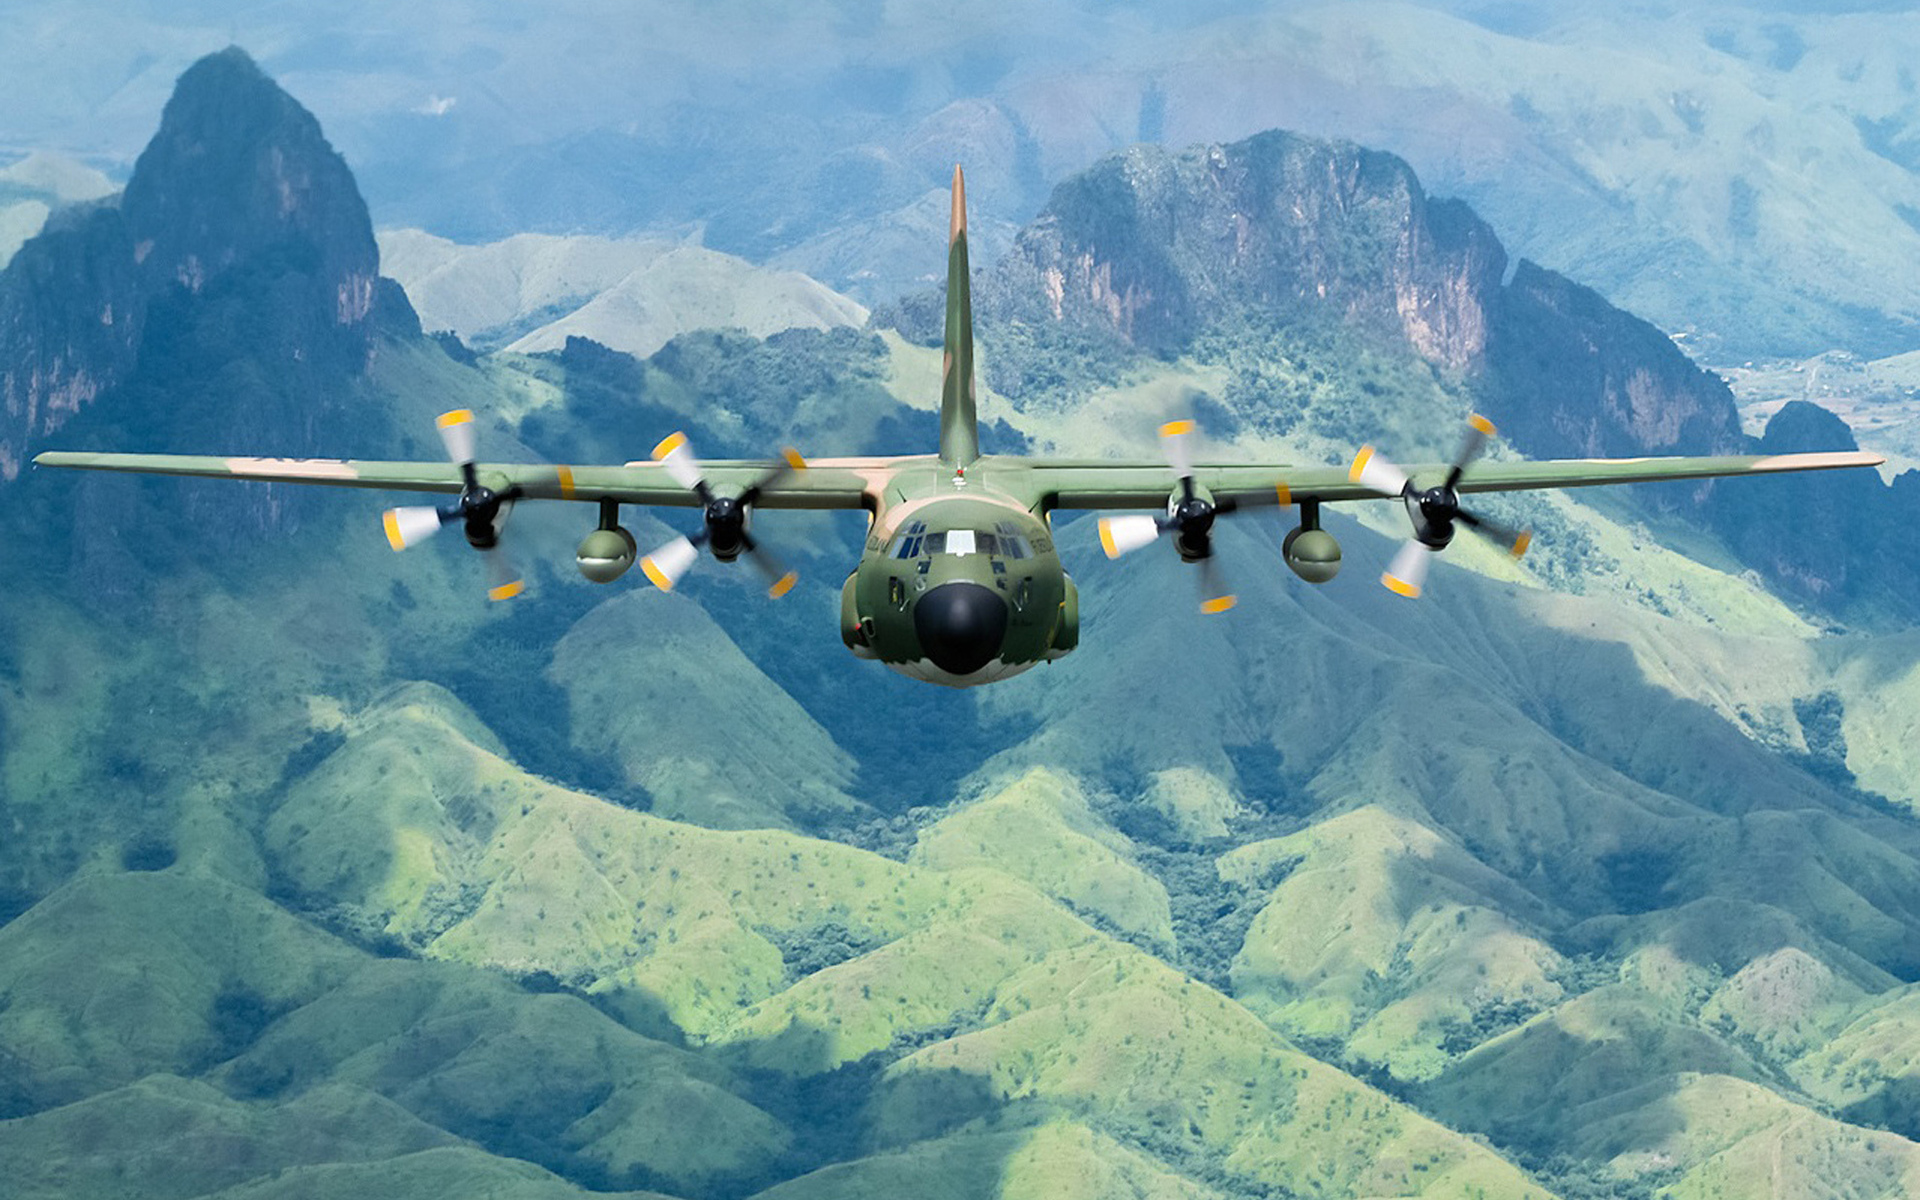 c 130h, Military, Transpo, Wings, Mountains, Landscapes, Airplane, Plane Wallpaper